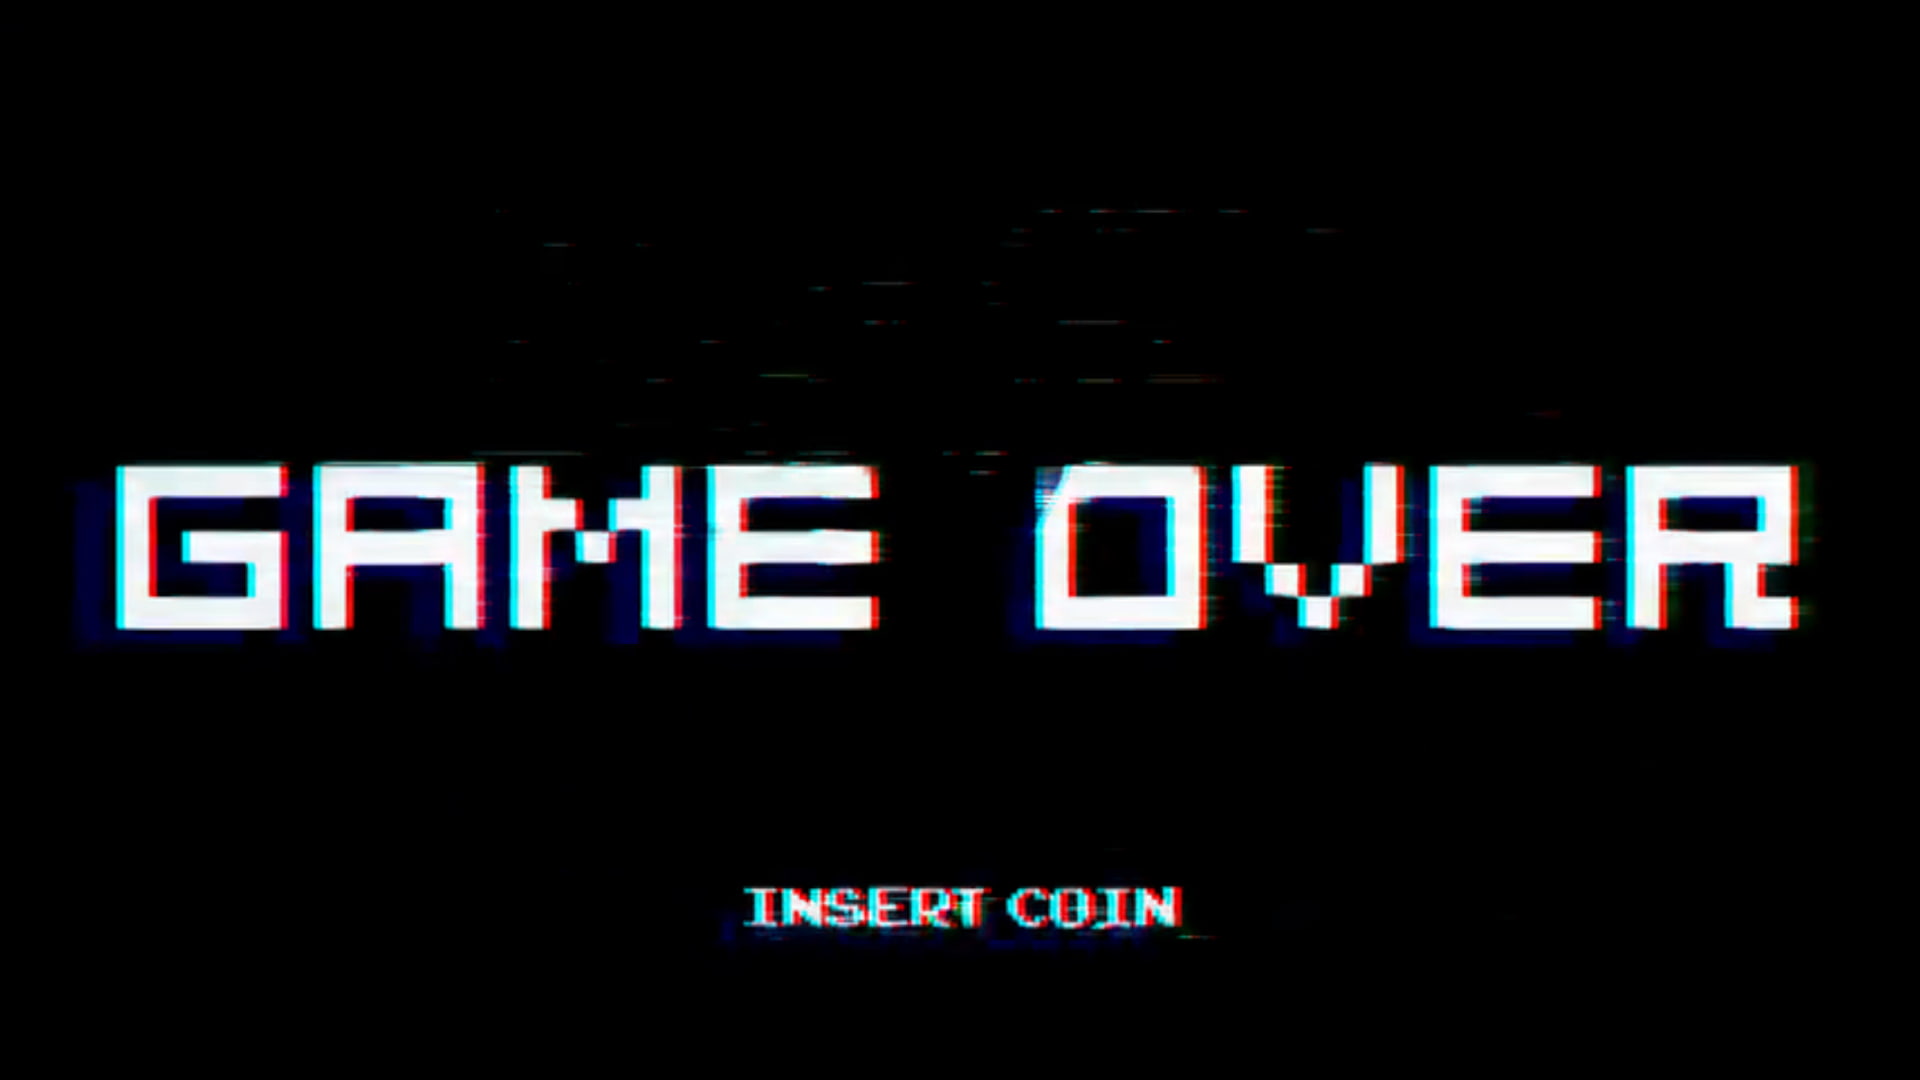 Arcade, Chromatic Aberration, GAME OVER, Simple, Typography